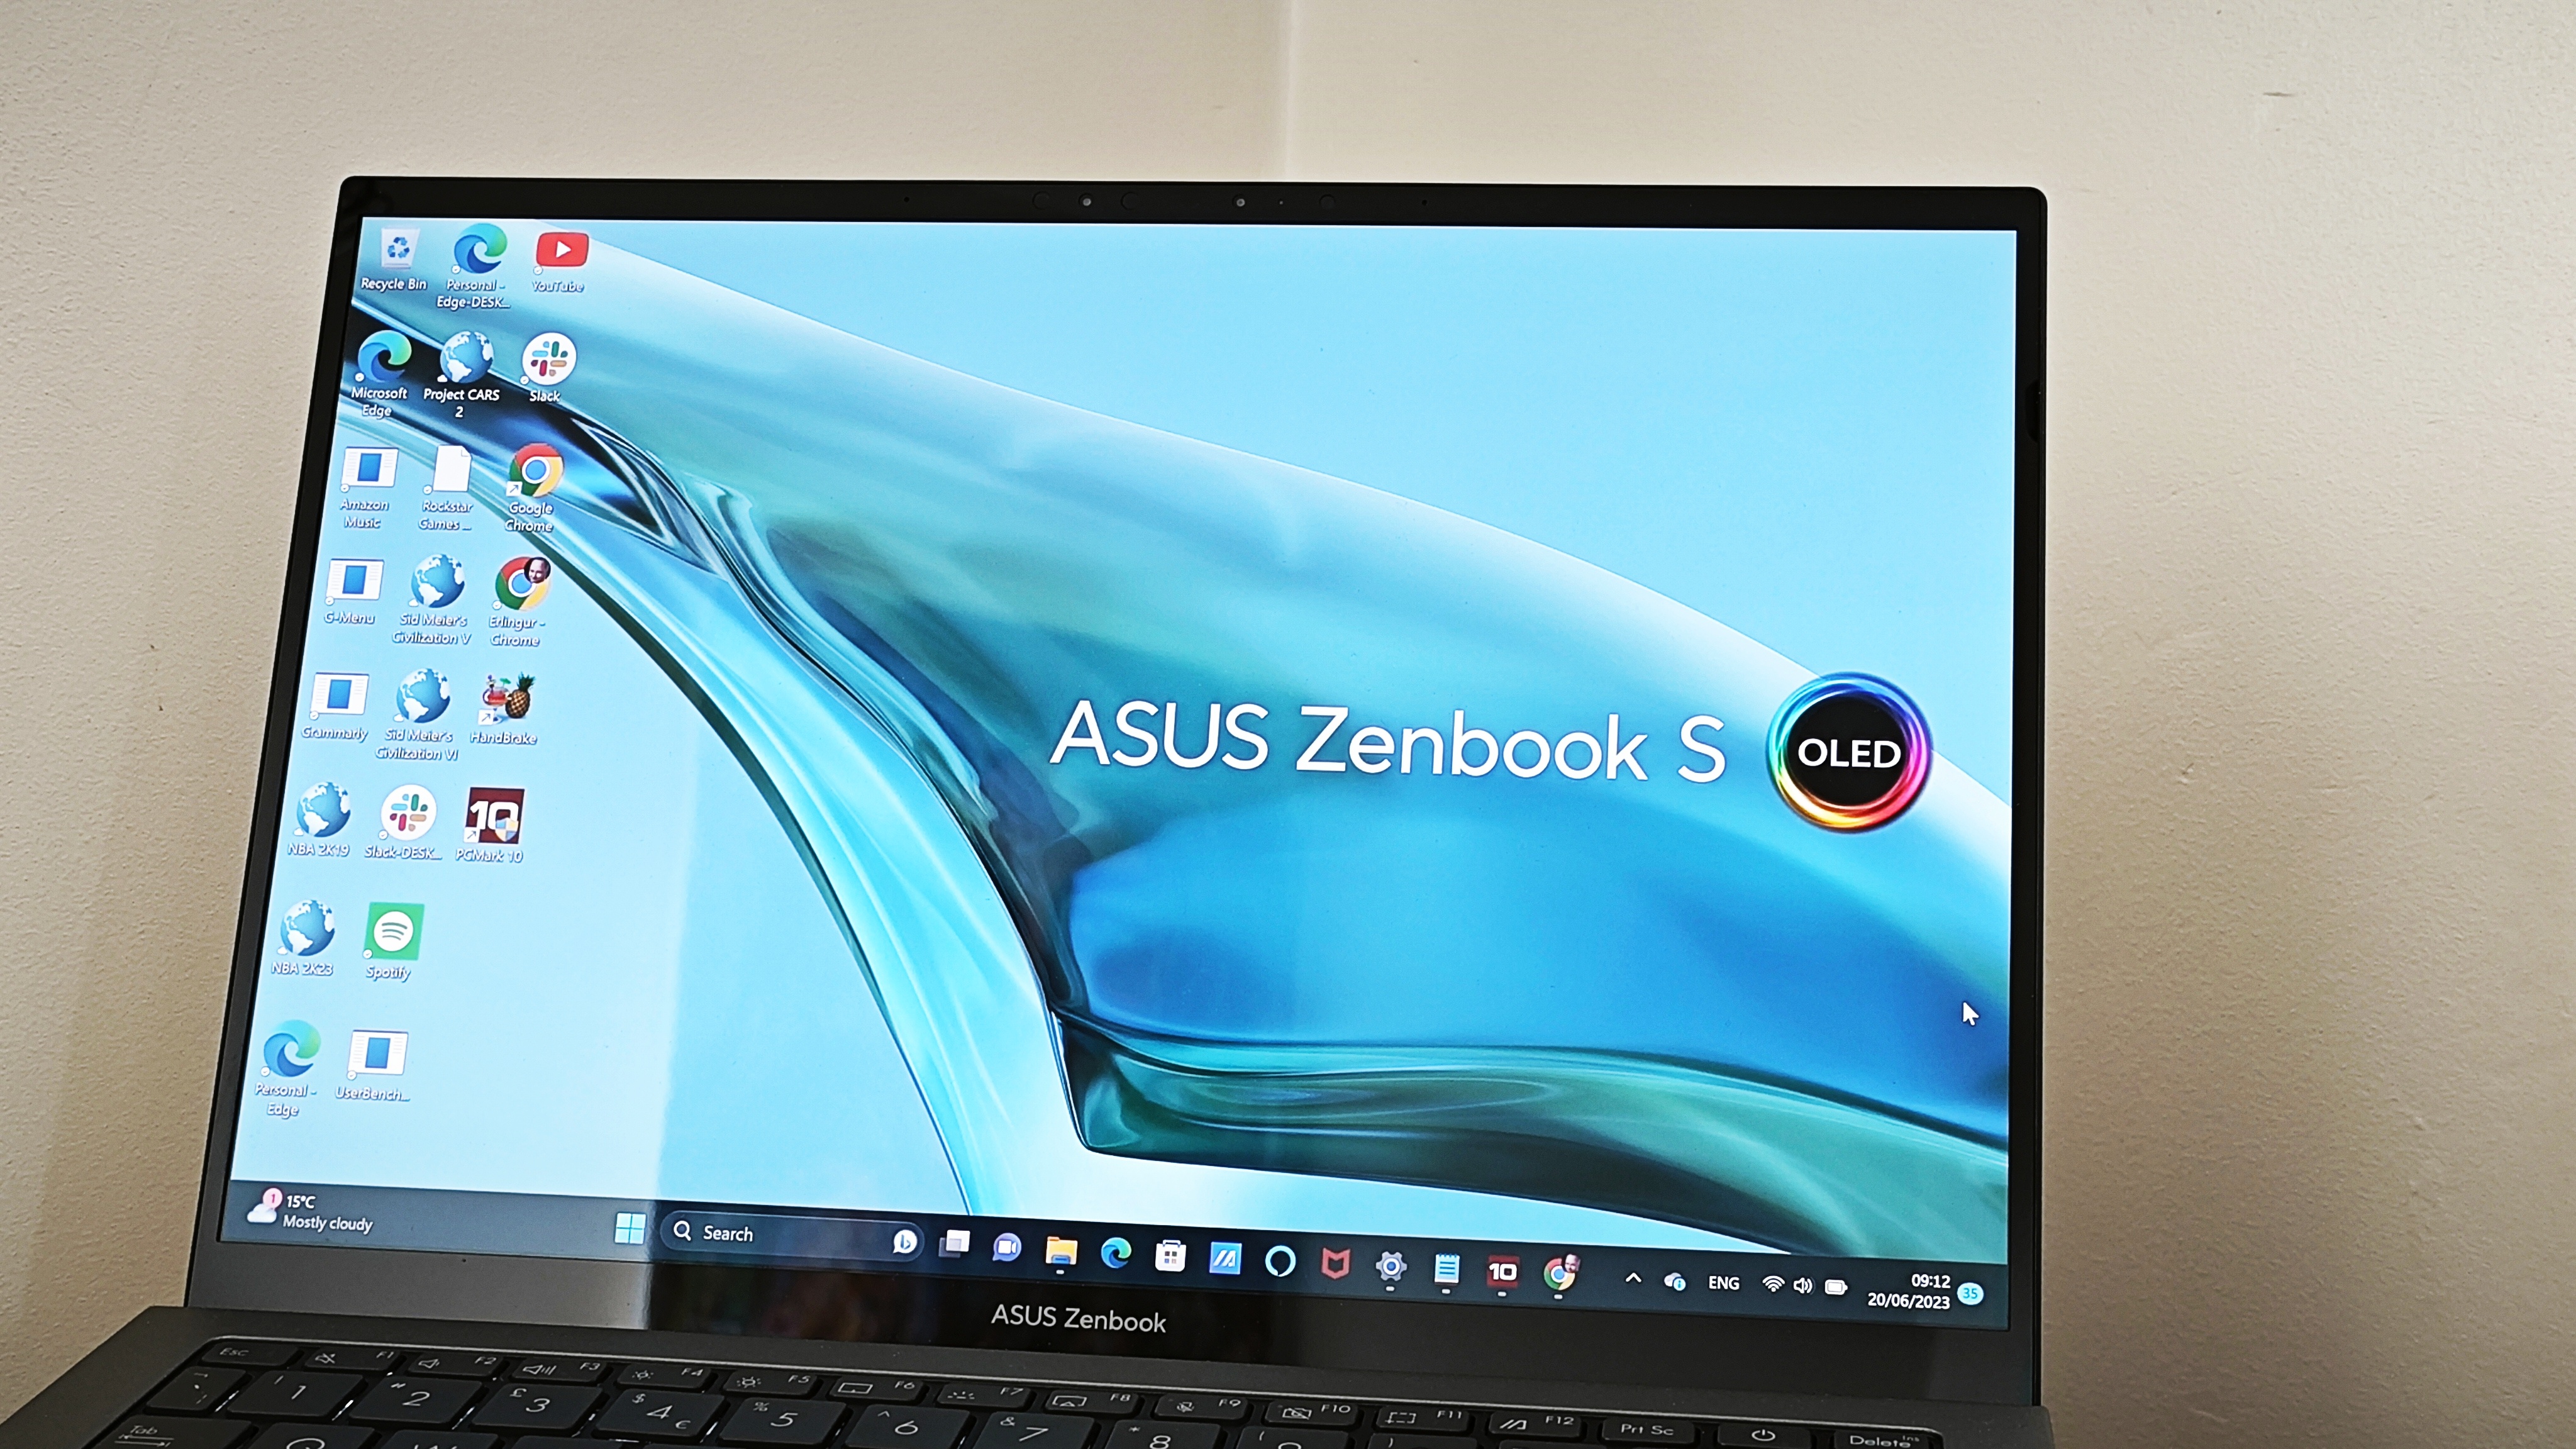 Asus Zenbook S 13 OLED review: A tiny laptop but plenty fast